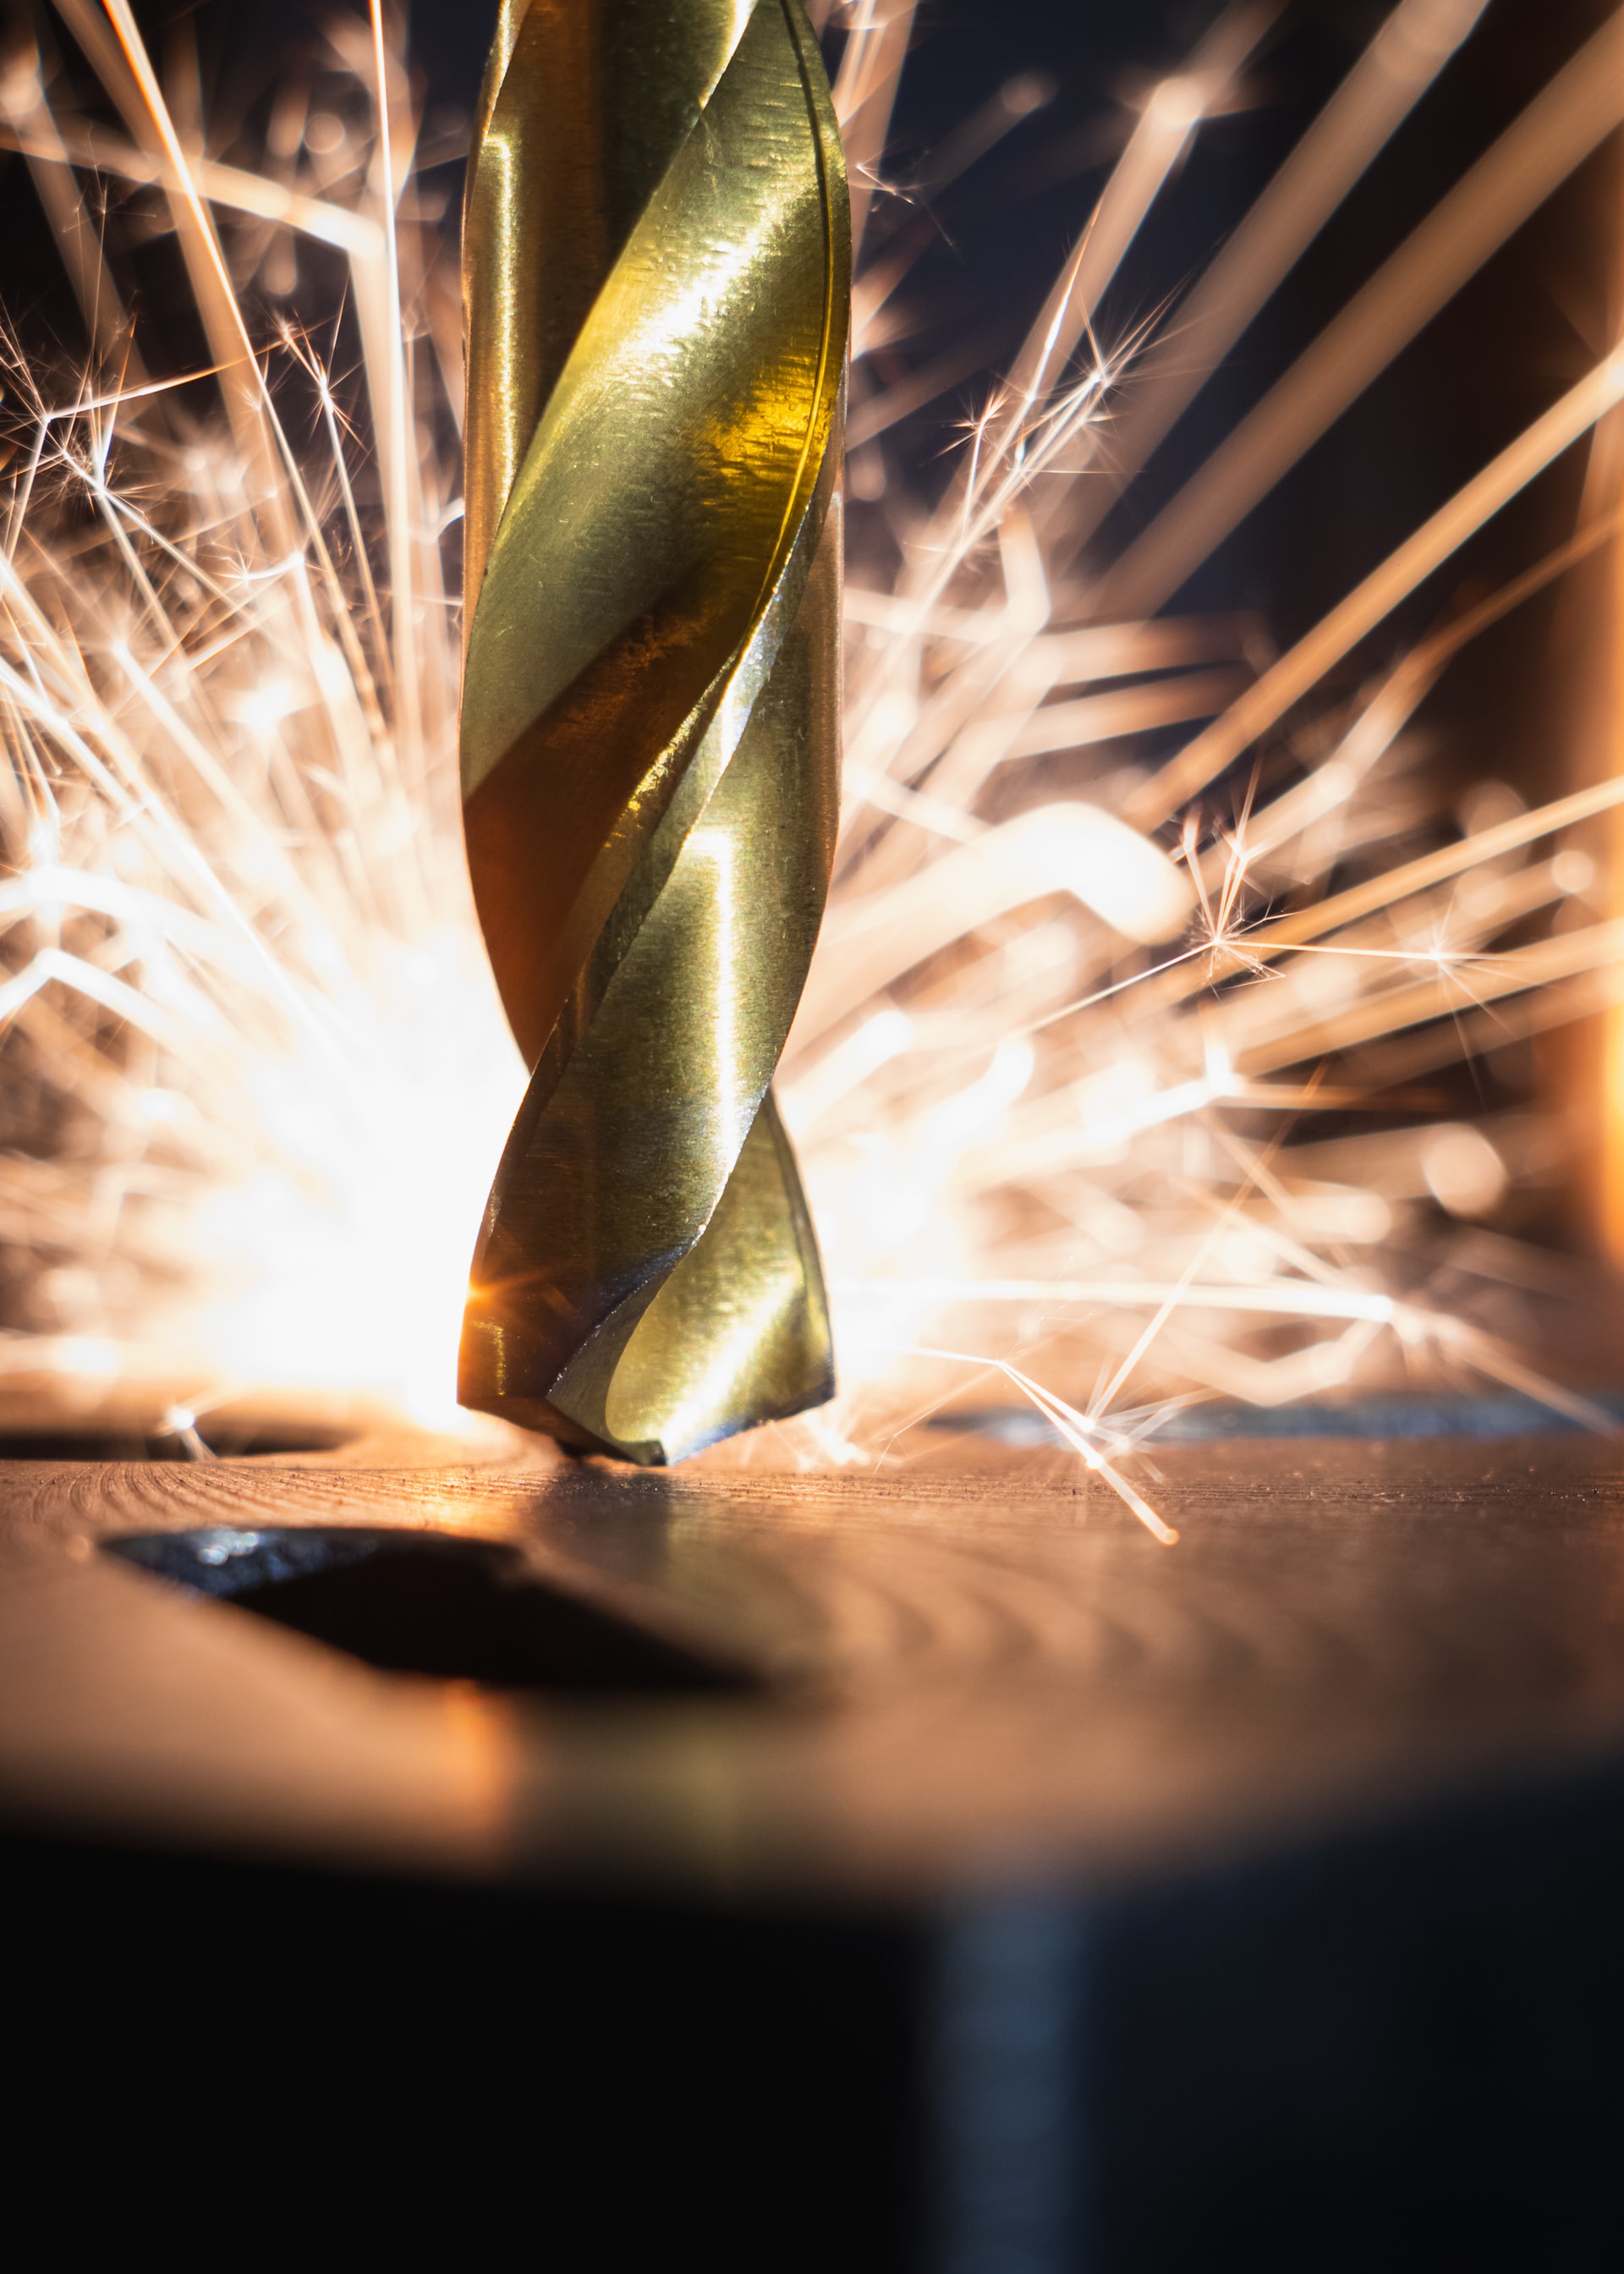 Golden drill bit with metal sparks